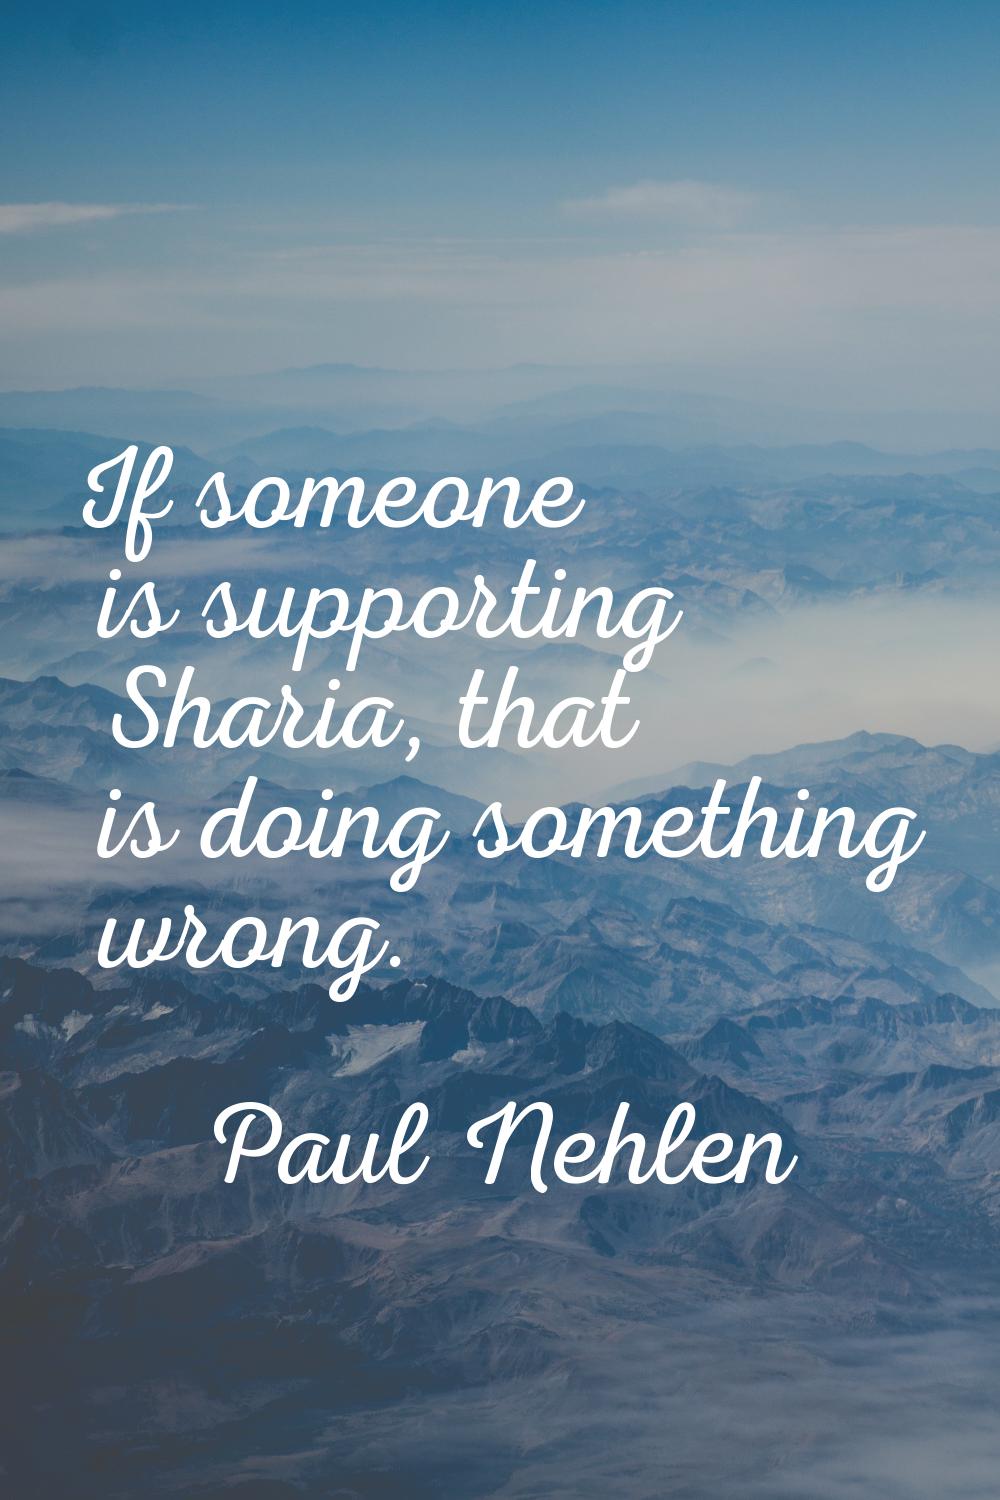 If someone is supporting Sharia, that is doing something wrong.